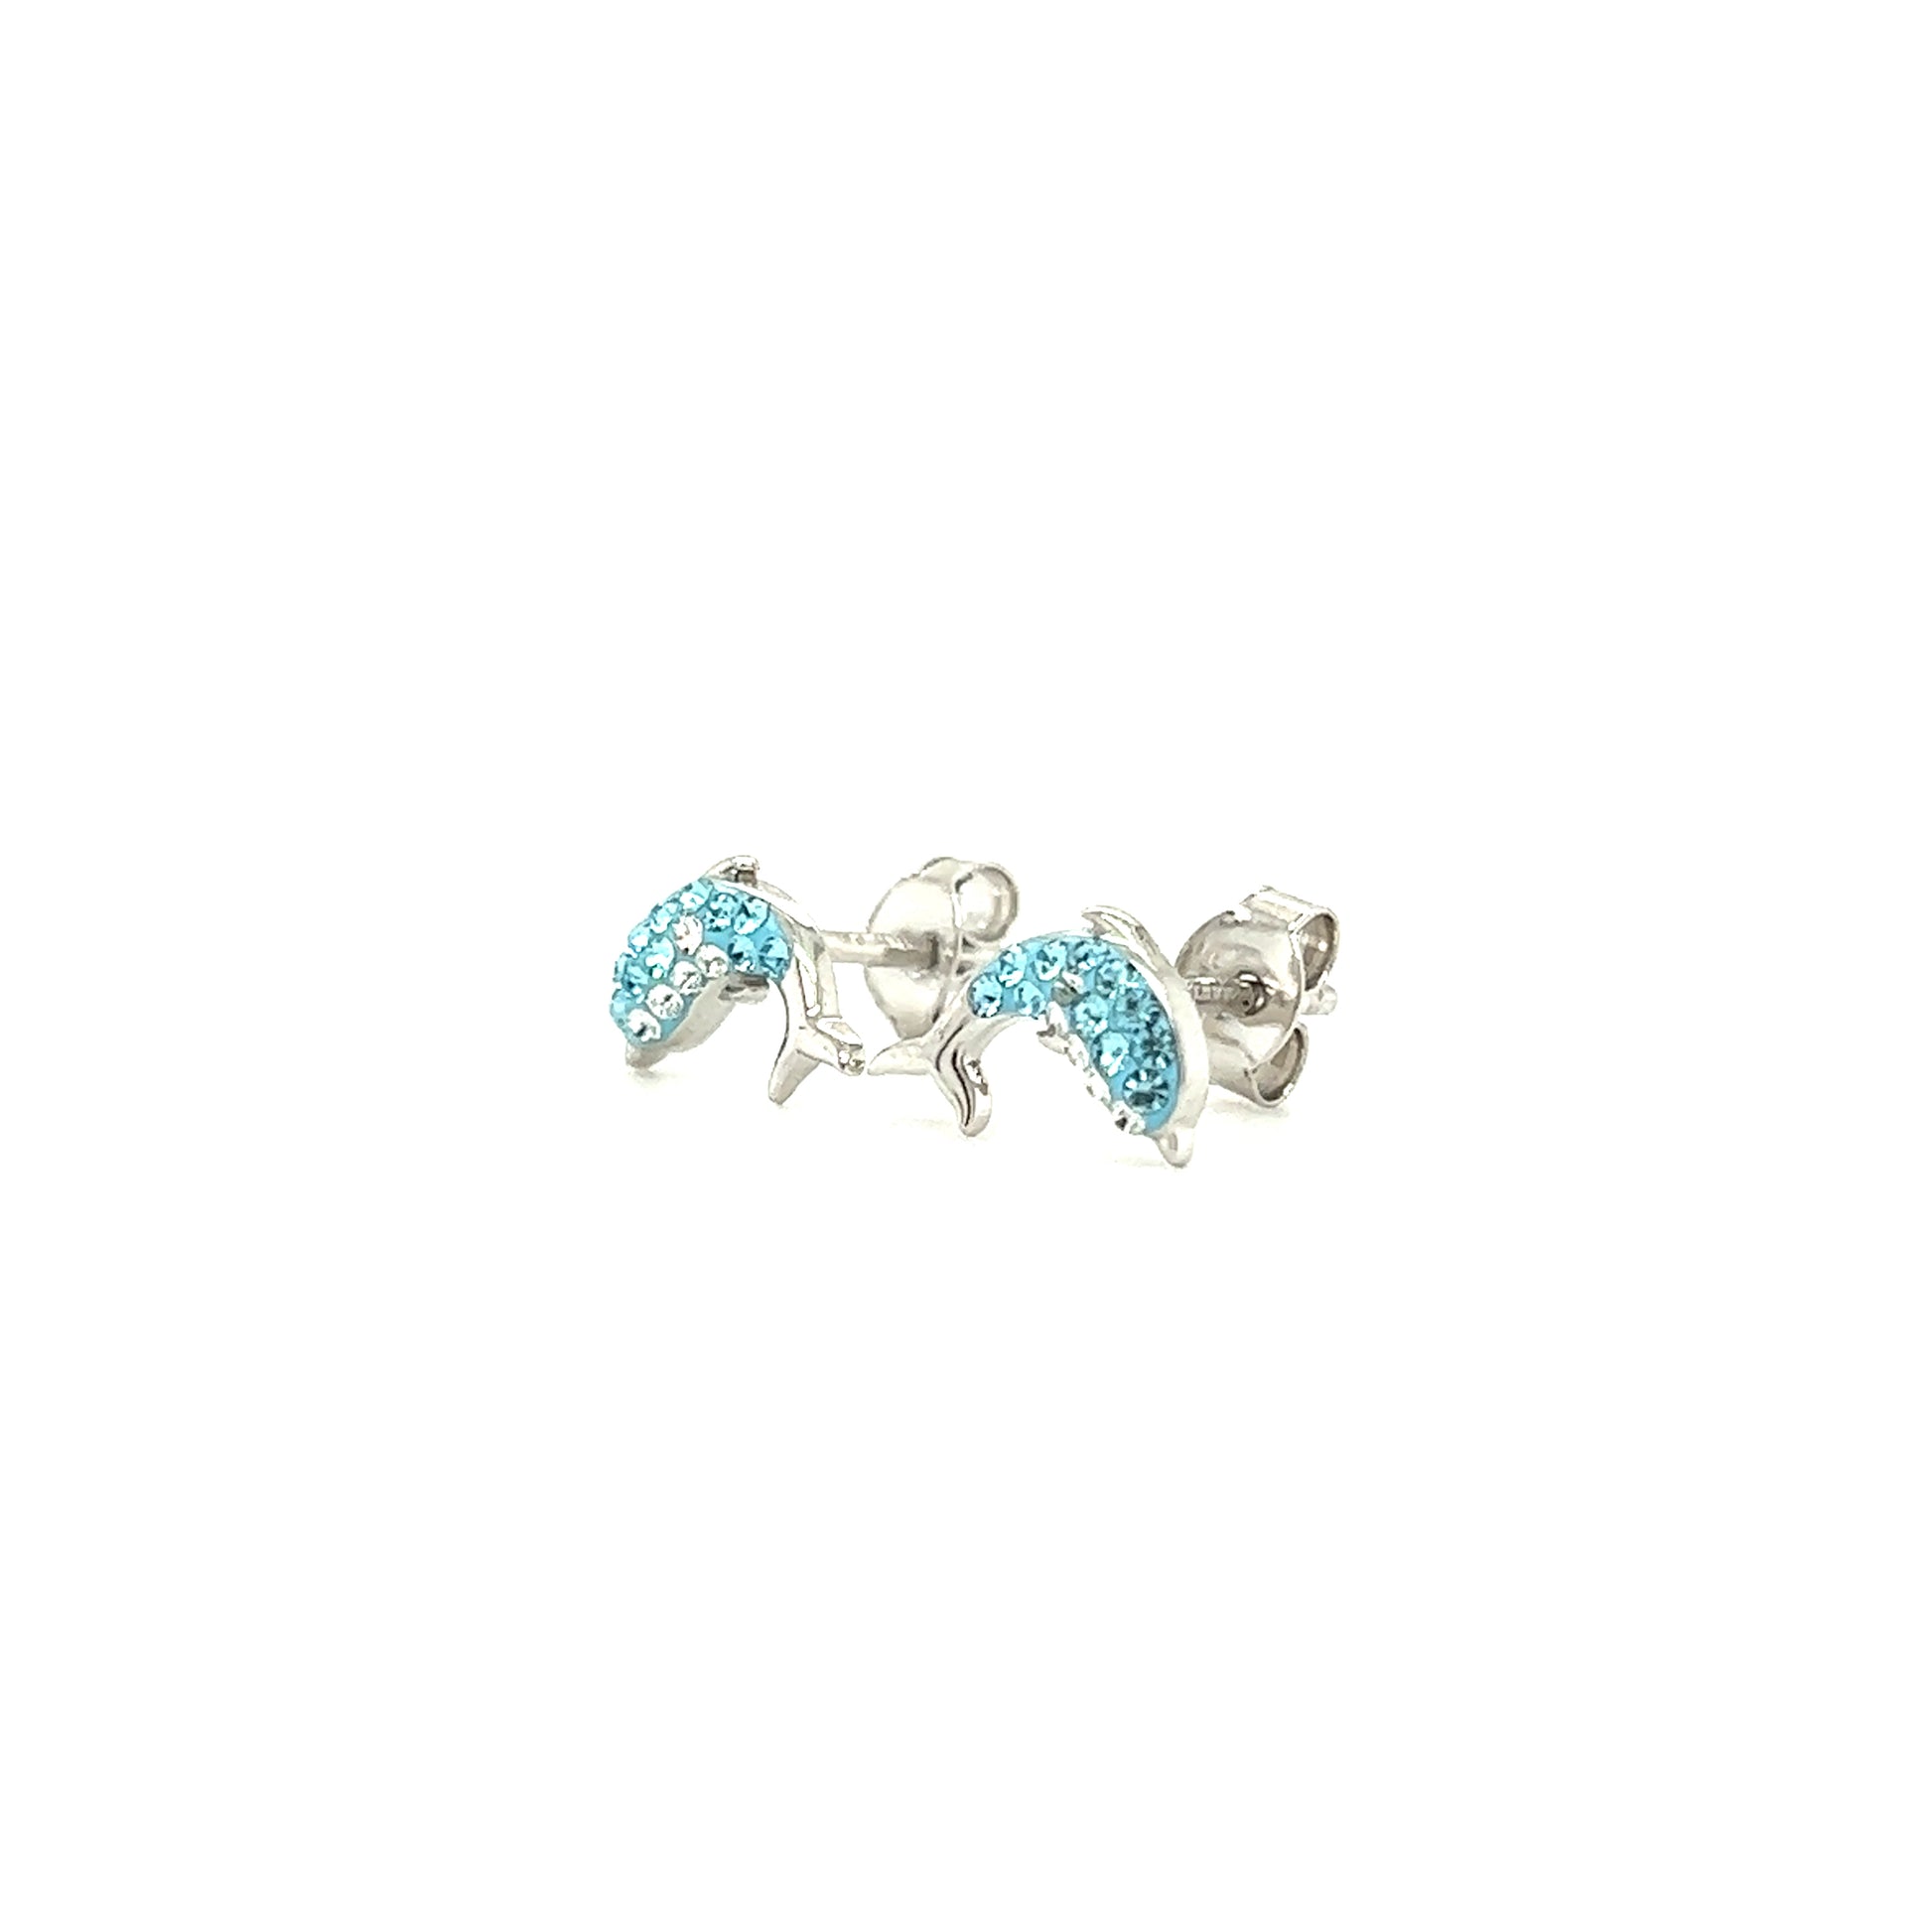 Dolphin Stud Earrings with Aqua and White Crystals in Sterling Silver Right Side View